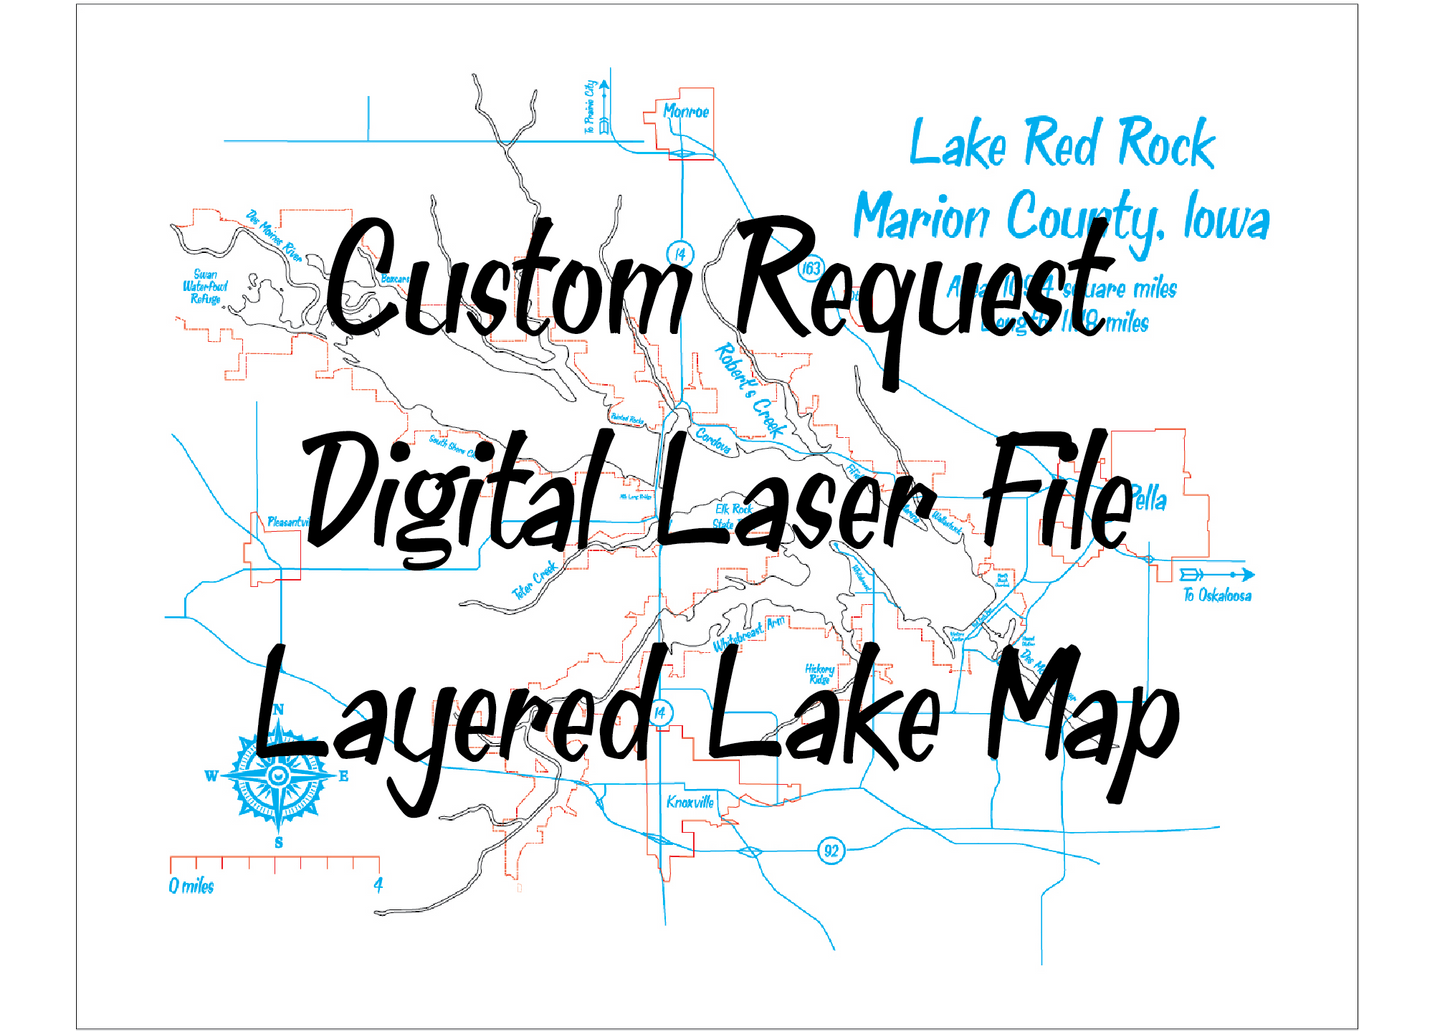 Custom Request - Jackson County Mississippi - Laser Engraved Map Cut File